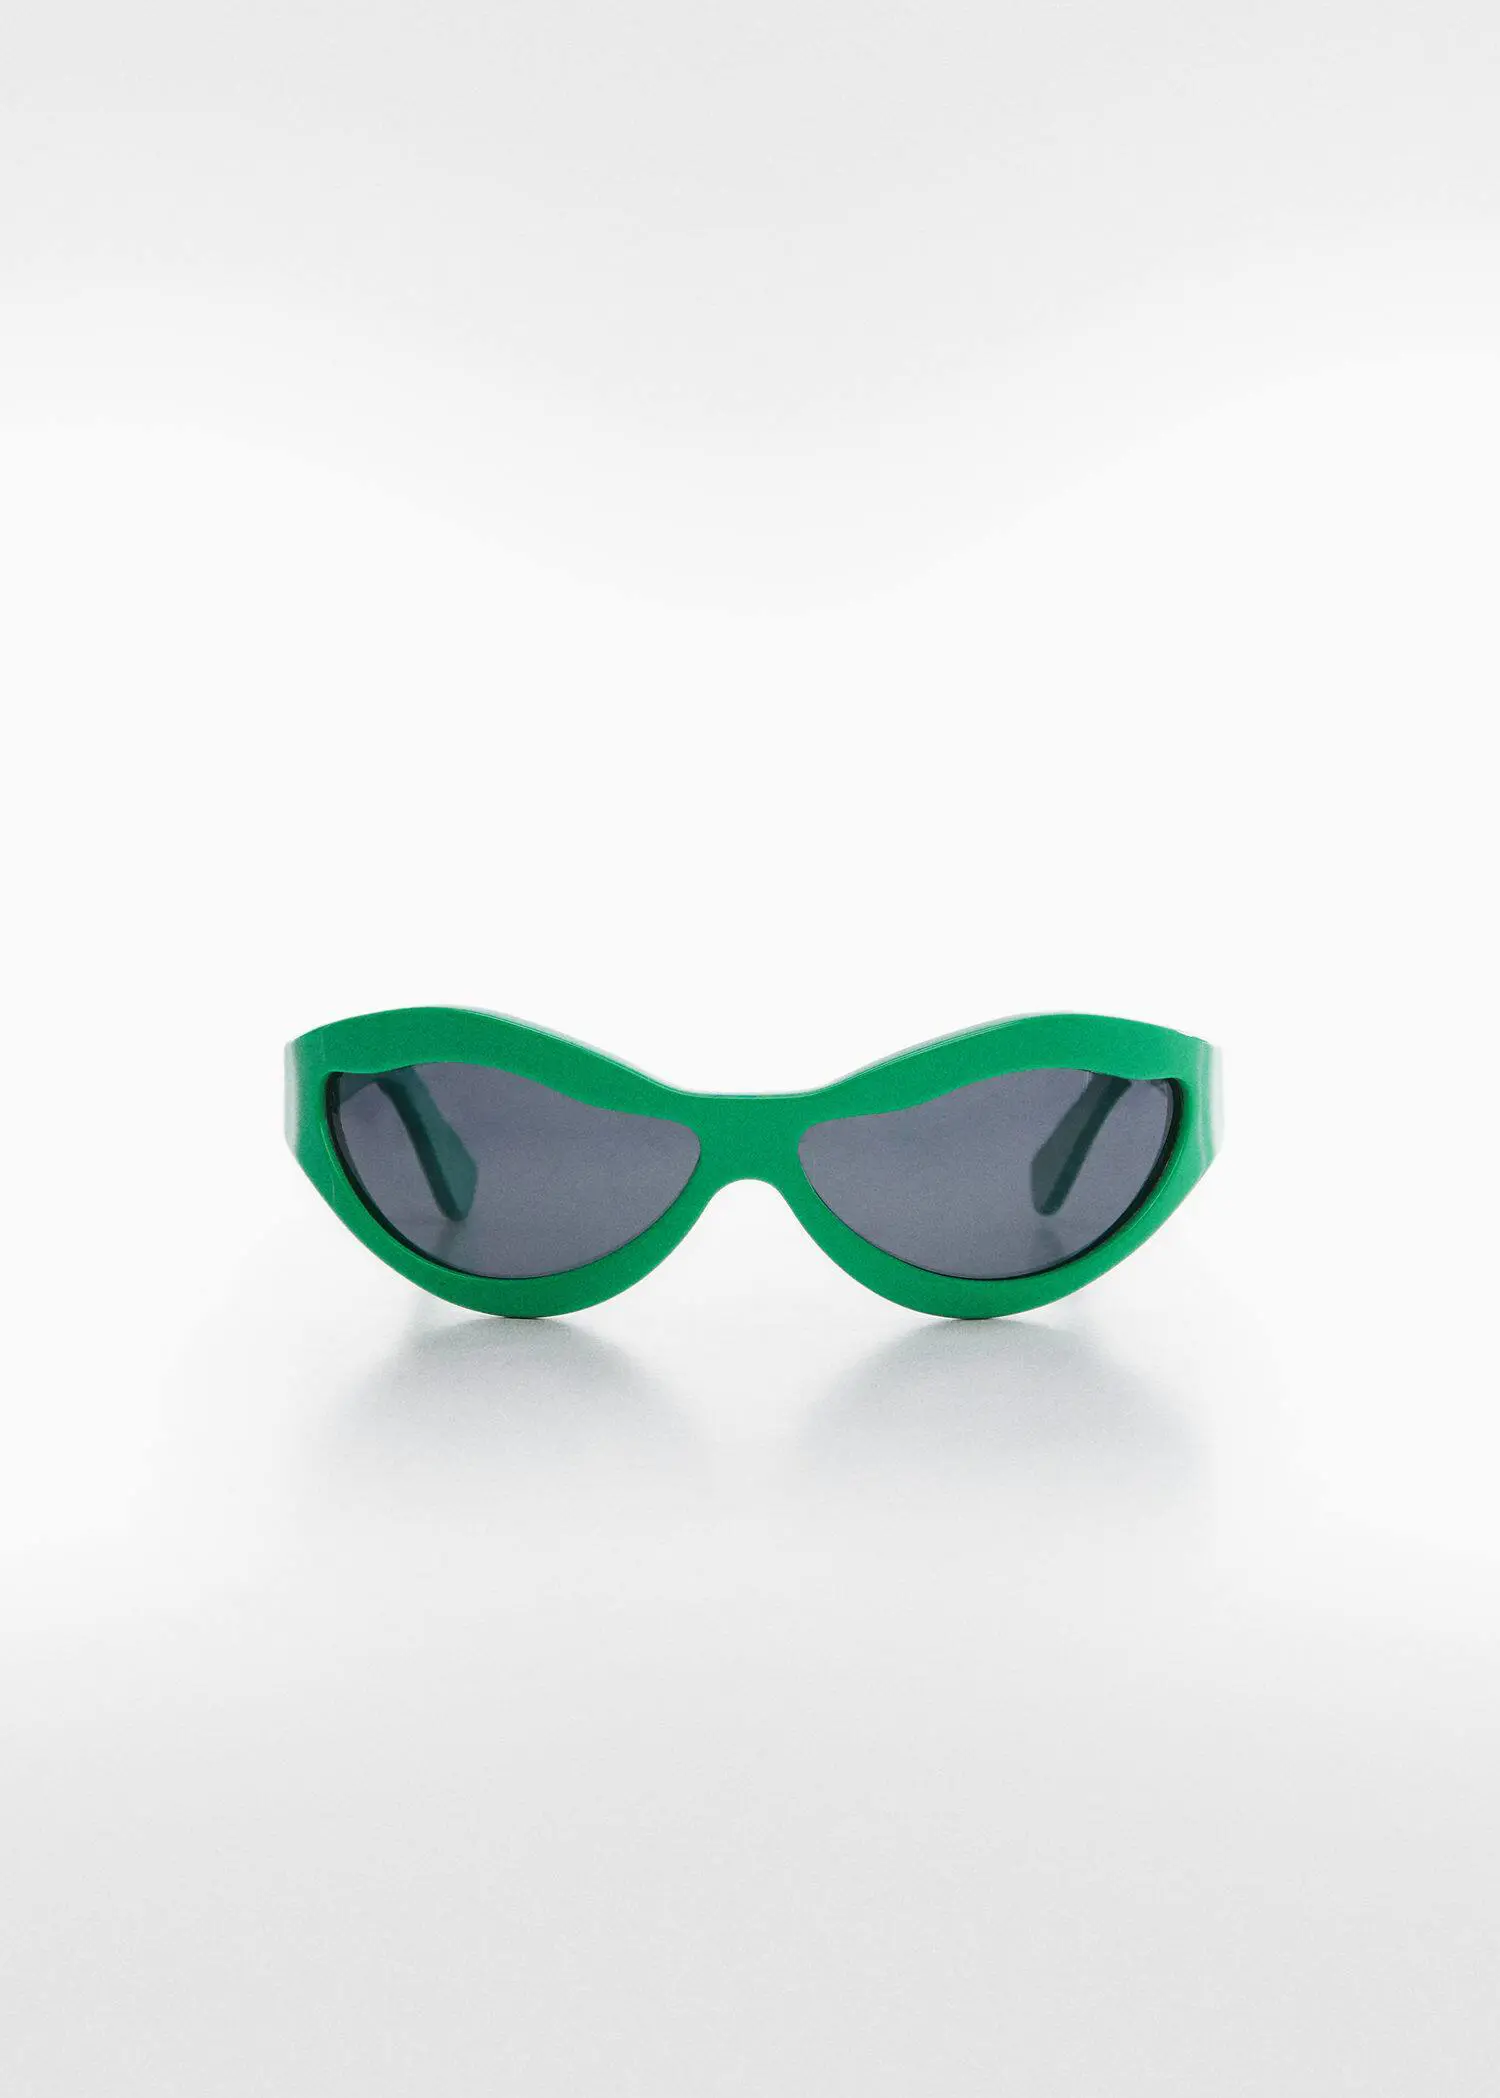 Mango Irregular crystals sunglasses. a pair of green sunglasses sitting on top of a table. 